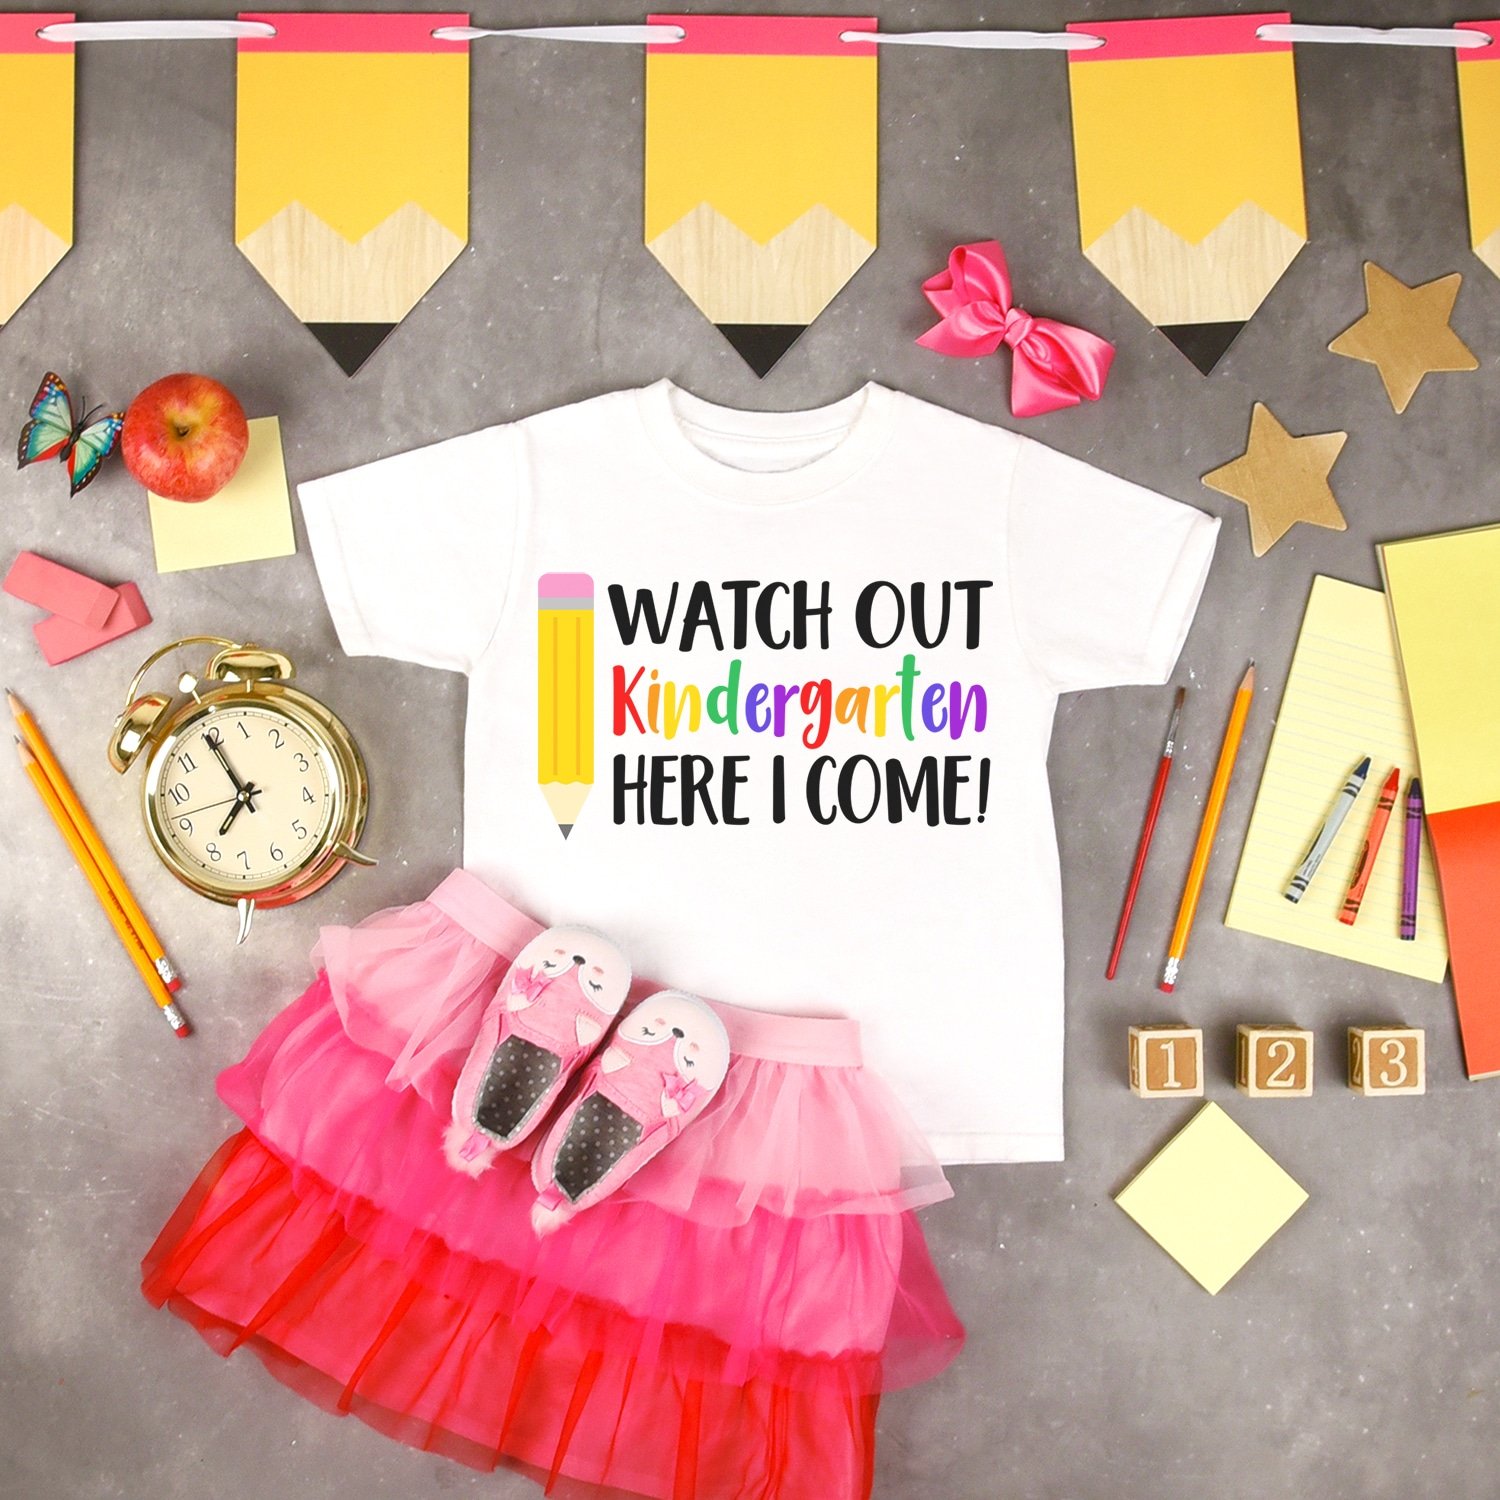 watch out kindergarten here i come t shirt and accessories